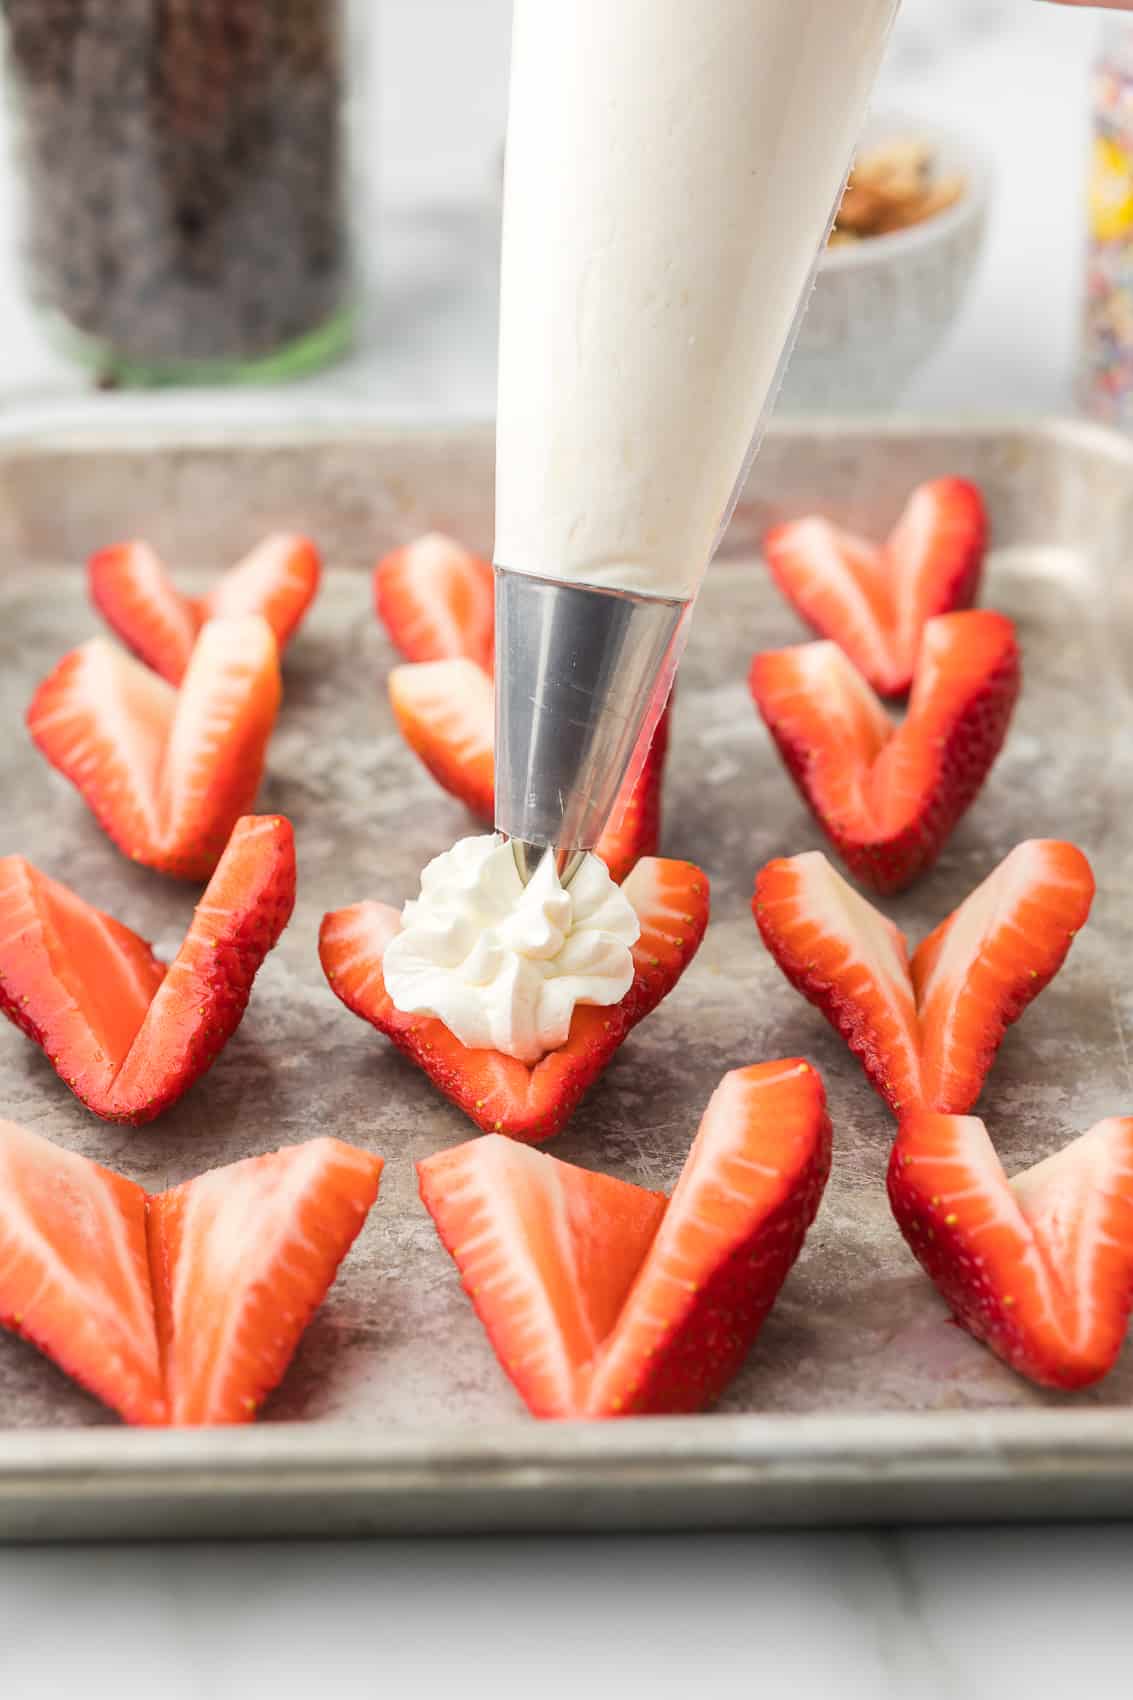 Piping bag with a star tip adding cream cheese mixture to a strawberry.